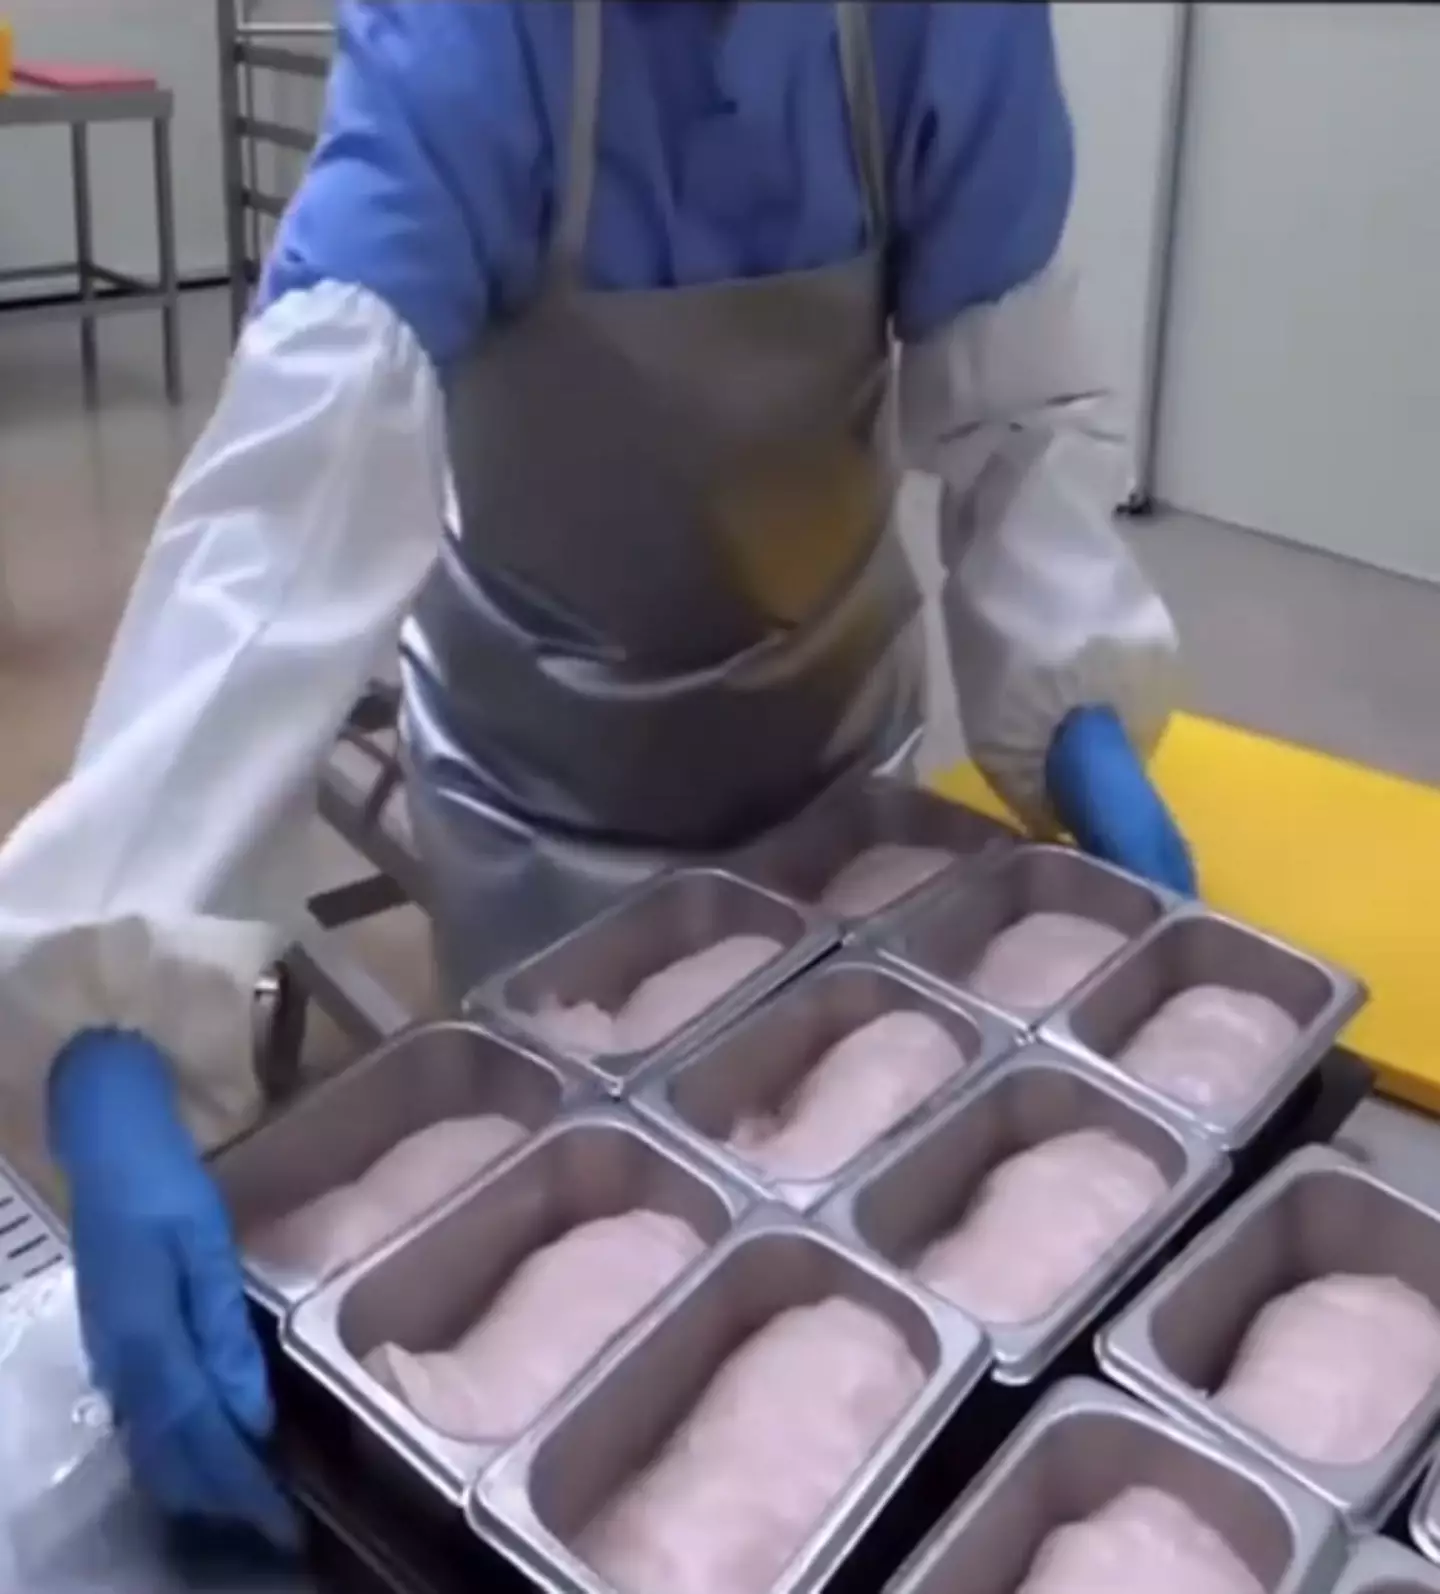 This video showing how sliced ham is made has disturbed people.